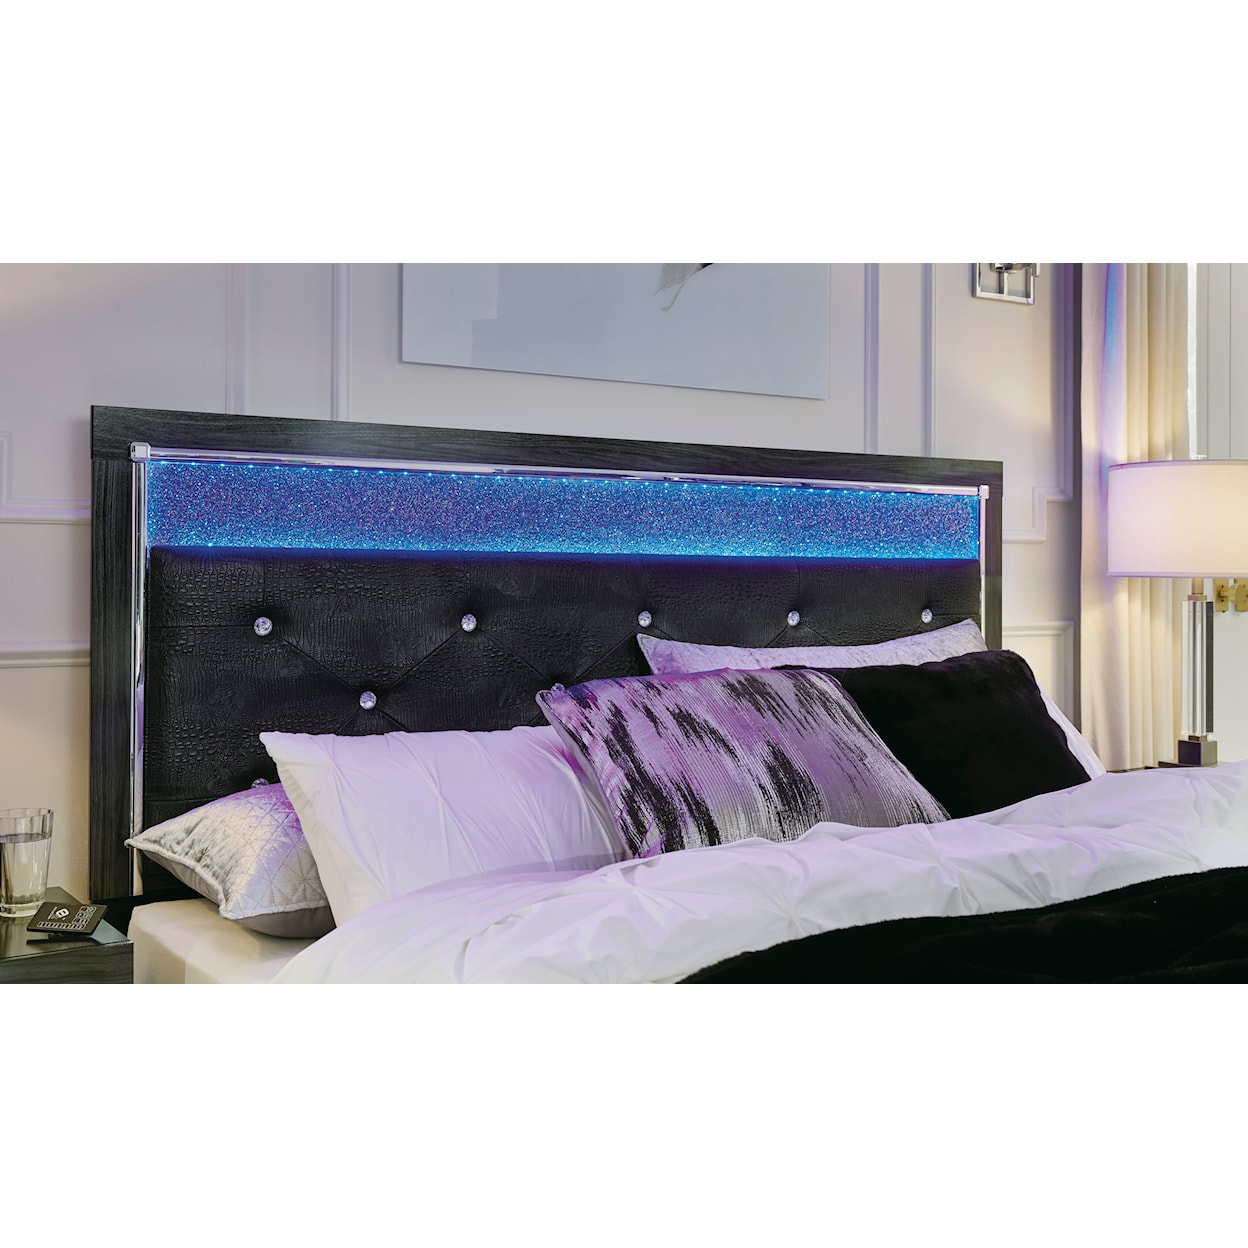 Signature Design by Ashley Kaydell King/Cal King Uph Panel Headboard